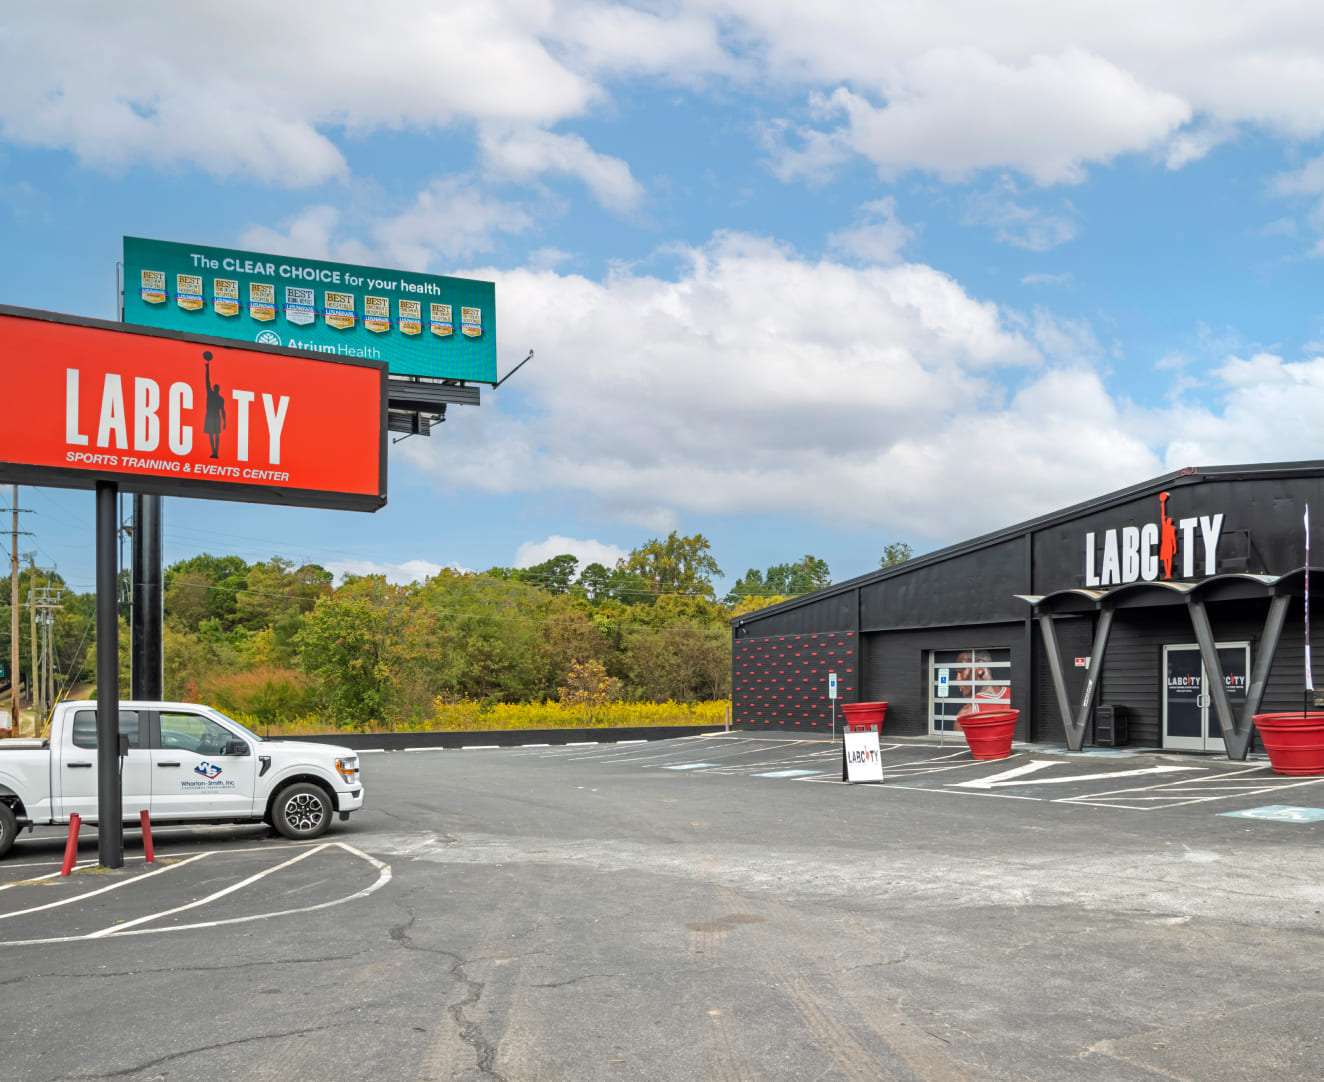 Another view of the LabCity at 2801 E. Independence Blvd in Charlotte, NC. The front signage and parking lot are visable.